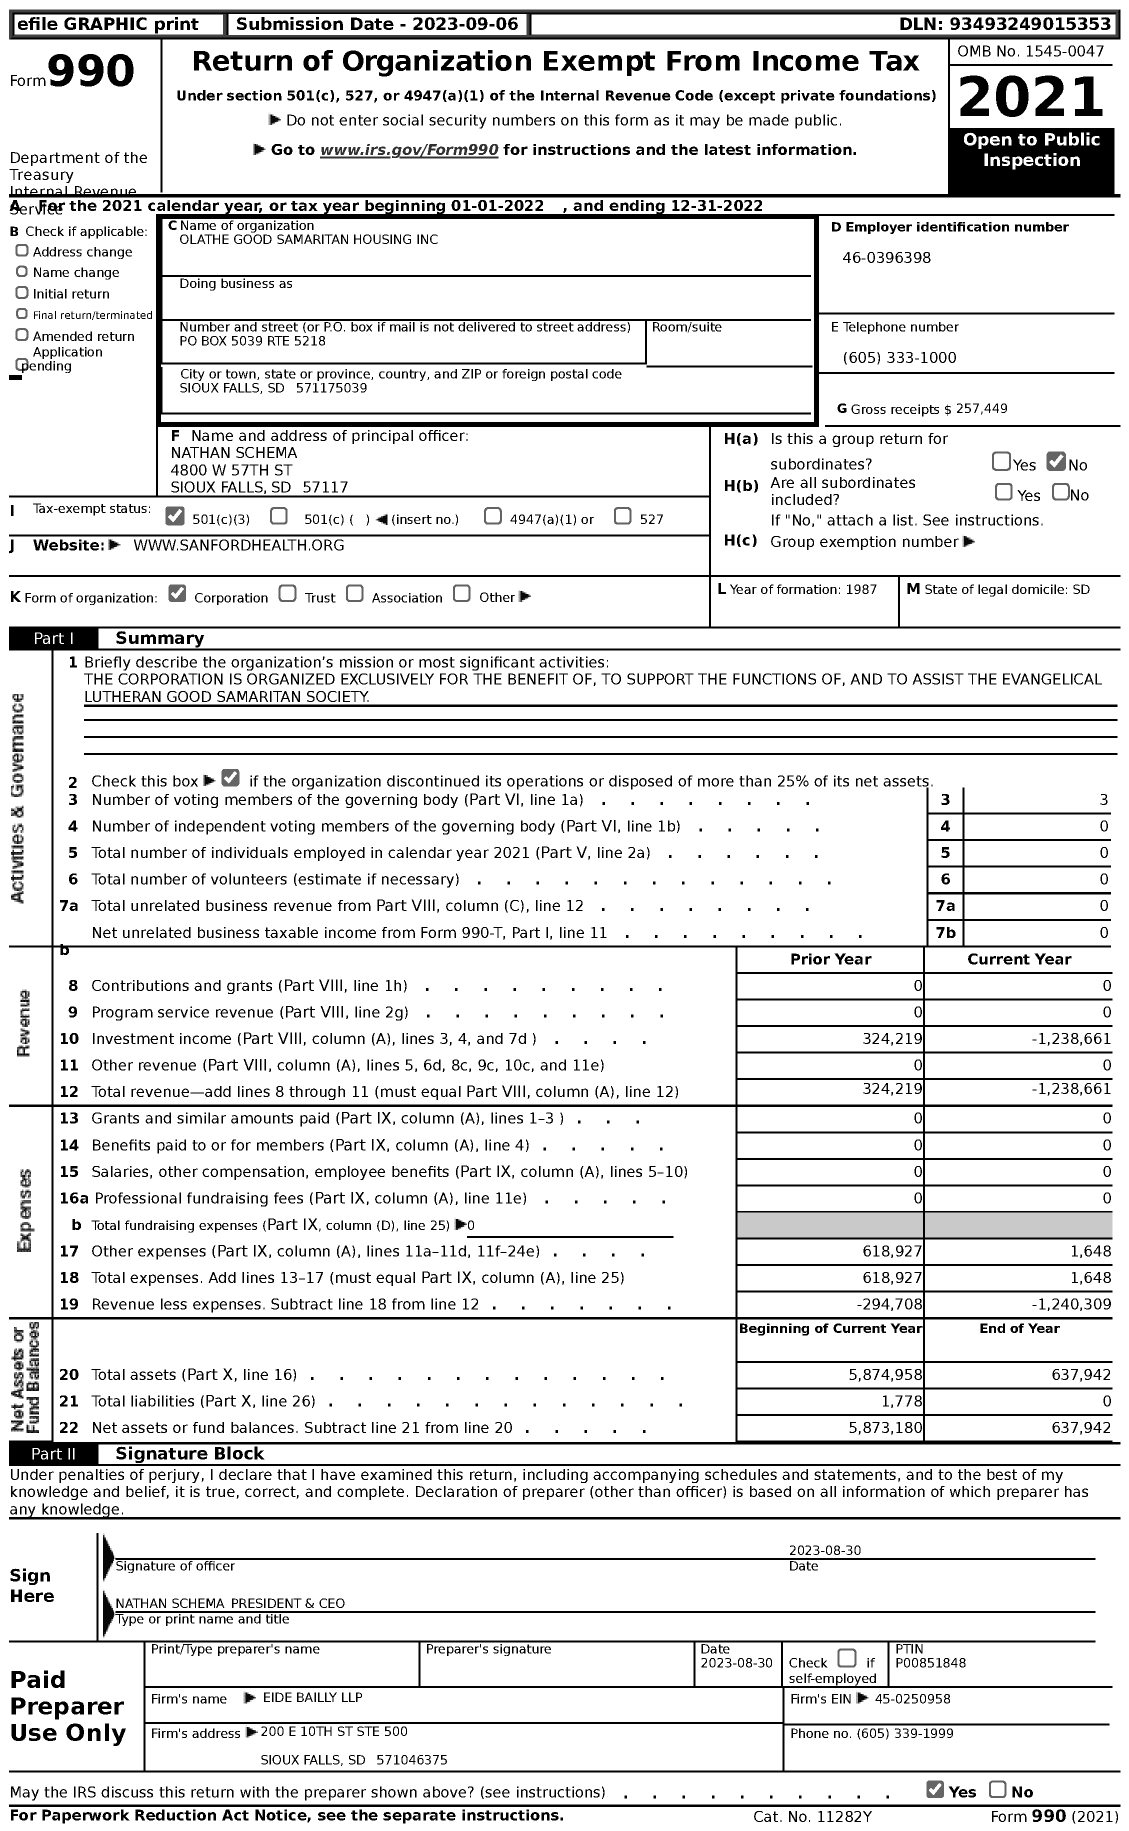 Image of first page of 2022 Form 990 for Olathe Good Samaritan Housing